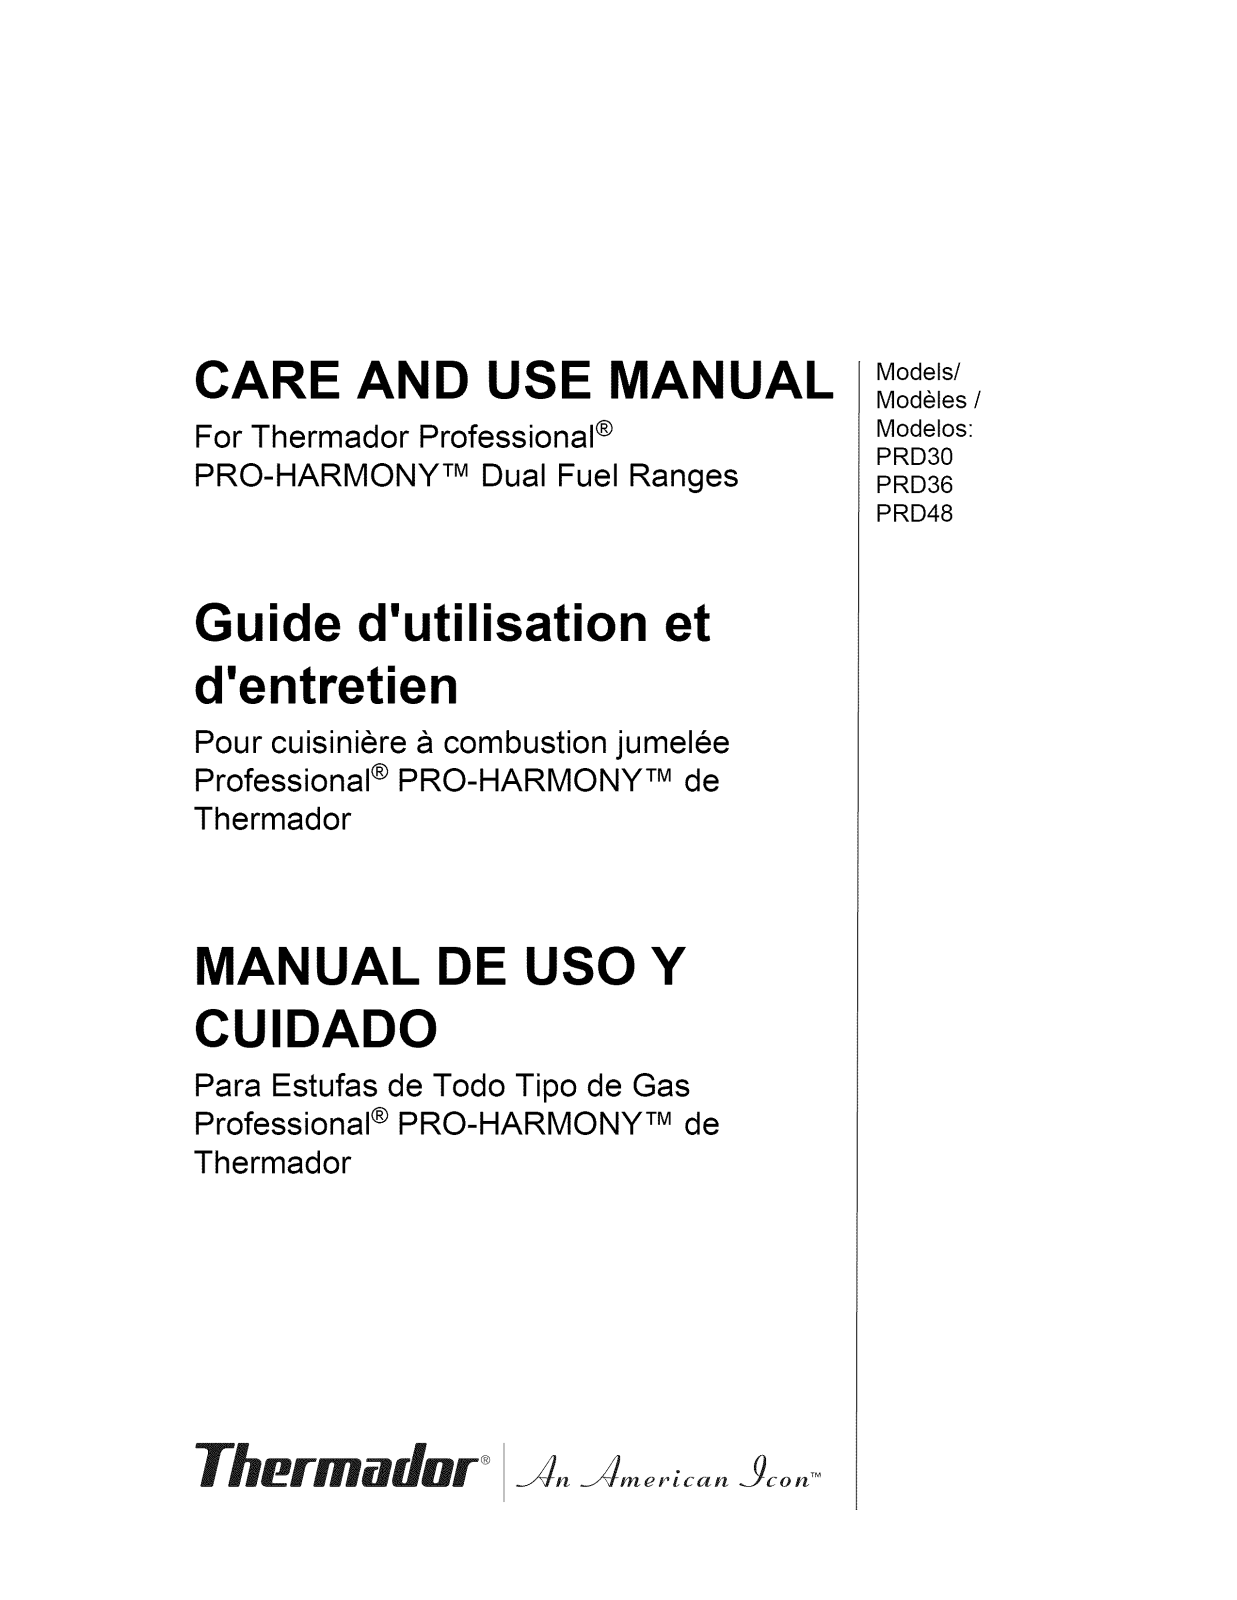 Thermador PRD486GDHU/01, PRD486GDHC/10, PRD486GDHC/09, PRD486GDHC/08, PRD486GDHC/07 Owner’s Manual